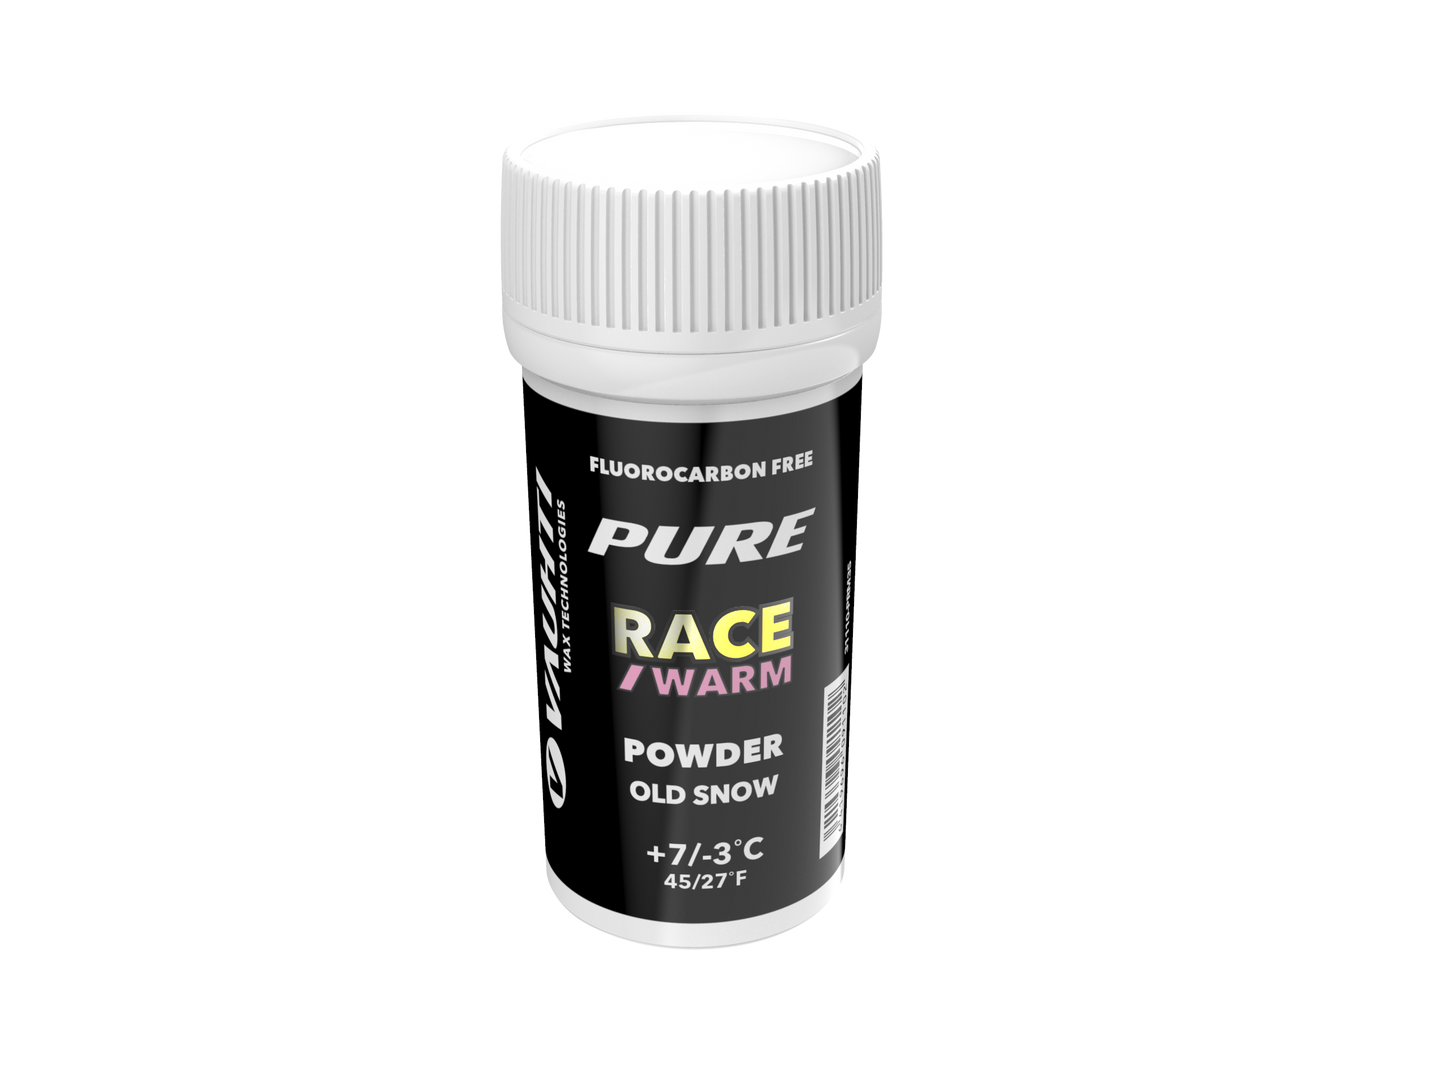 Bottle of PURE RACE OLD SNOW WARM POWDER